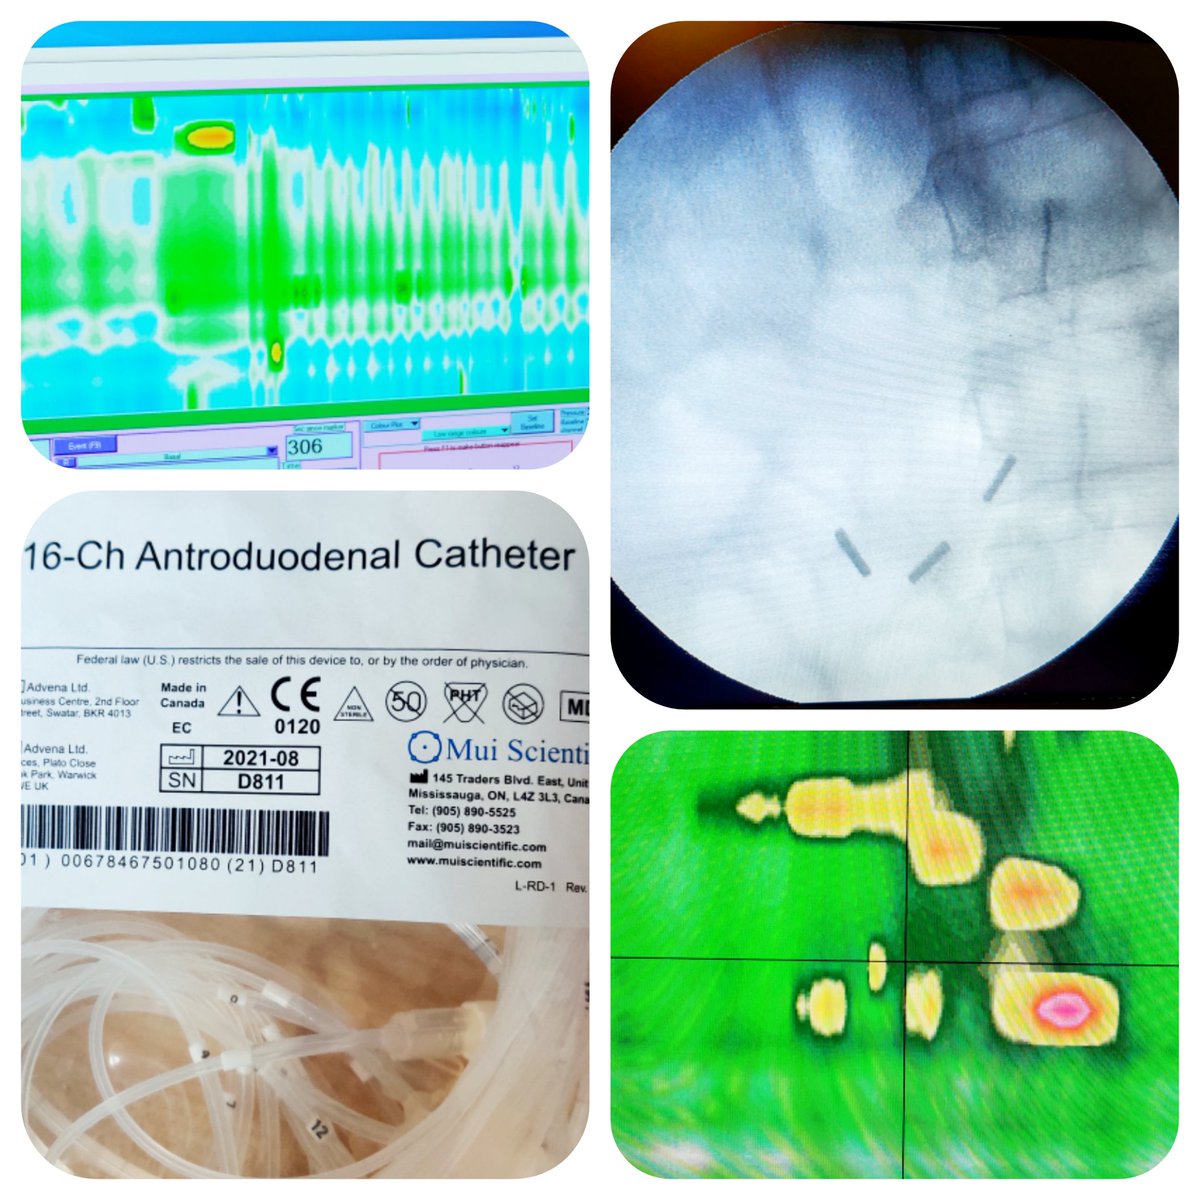 Proud to kick start Antroduodenal Manometry in our Neurogastroenterology & GI Motility Lab at @medanta...we are now one of the very few centers in India if not the world to do Antro-Duodenal Manometries...#firsttime #Neurogastro #GITwitter #Gastroparesis #MedTwitter